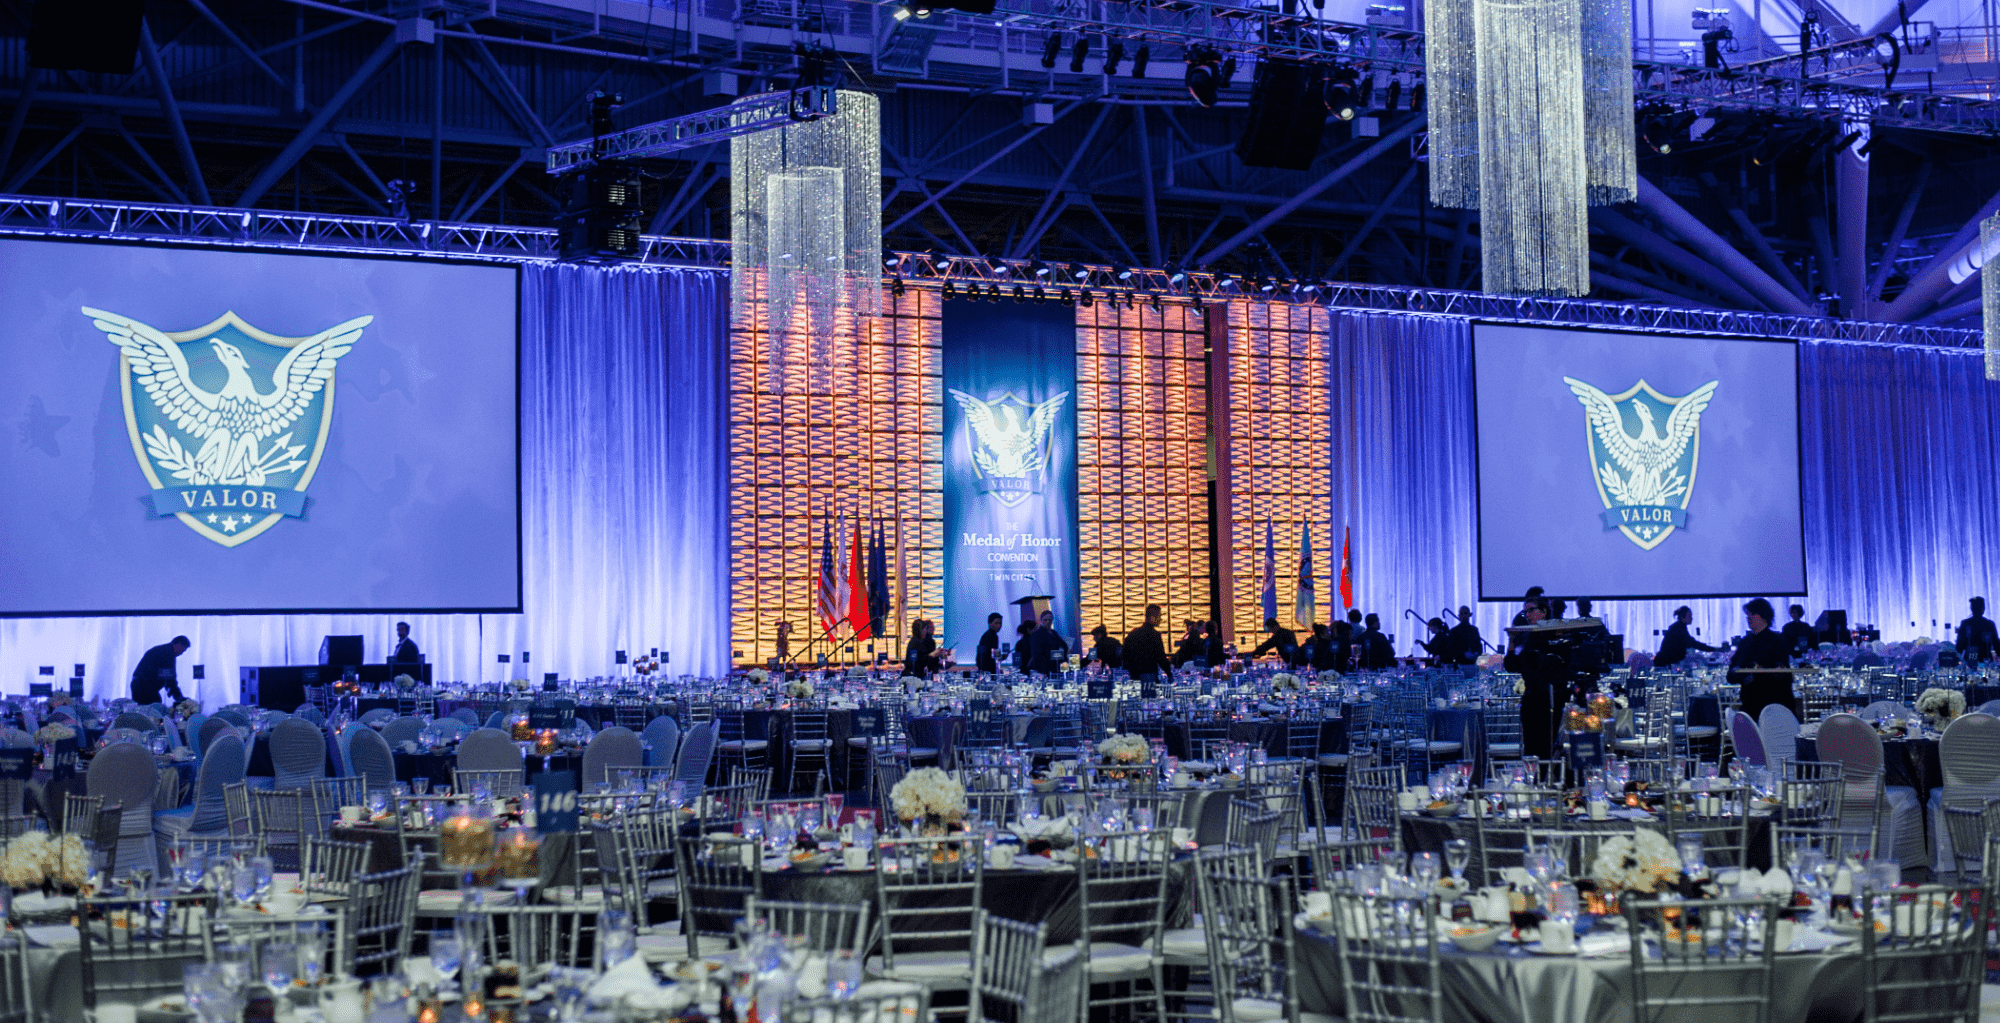 A ballroom filled decorated tables with flowers and silver tablecloths. Blue and orange colored lights on stage backdrops. Flags on the stages and company logo projected on screens and stage backdrop.